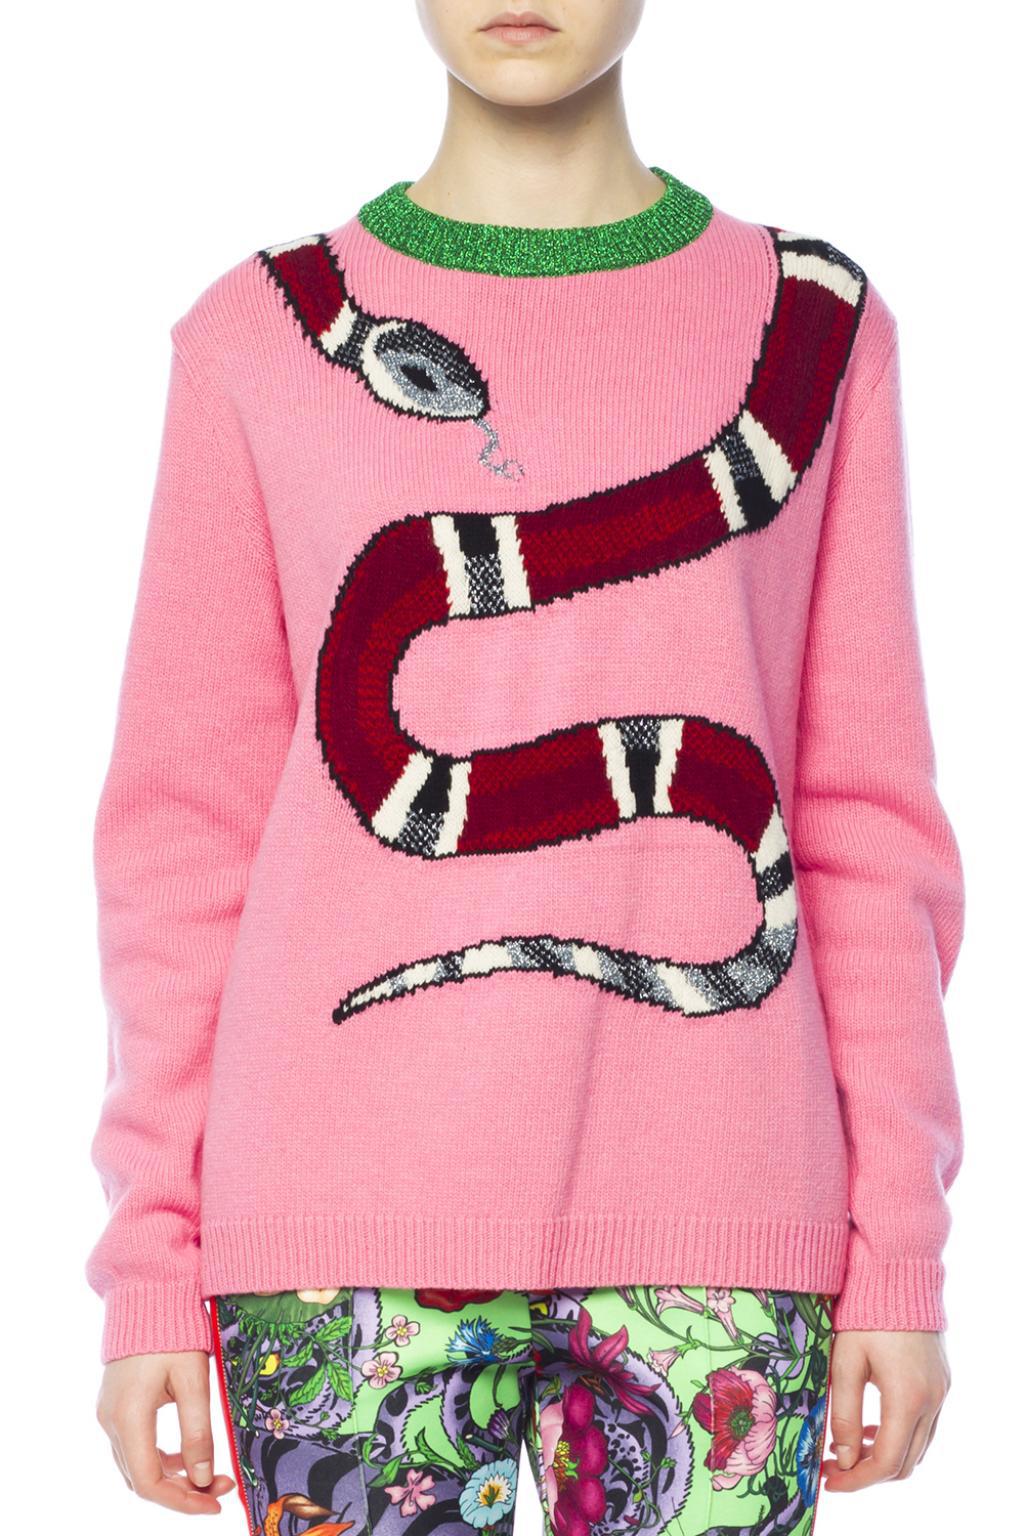 Gucci Wool Embroidered Snake Sweater in 